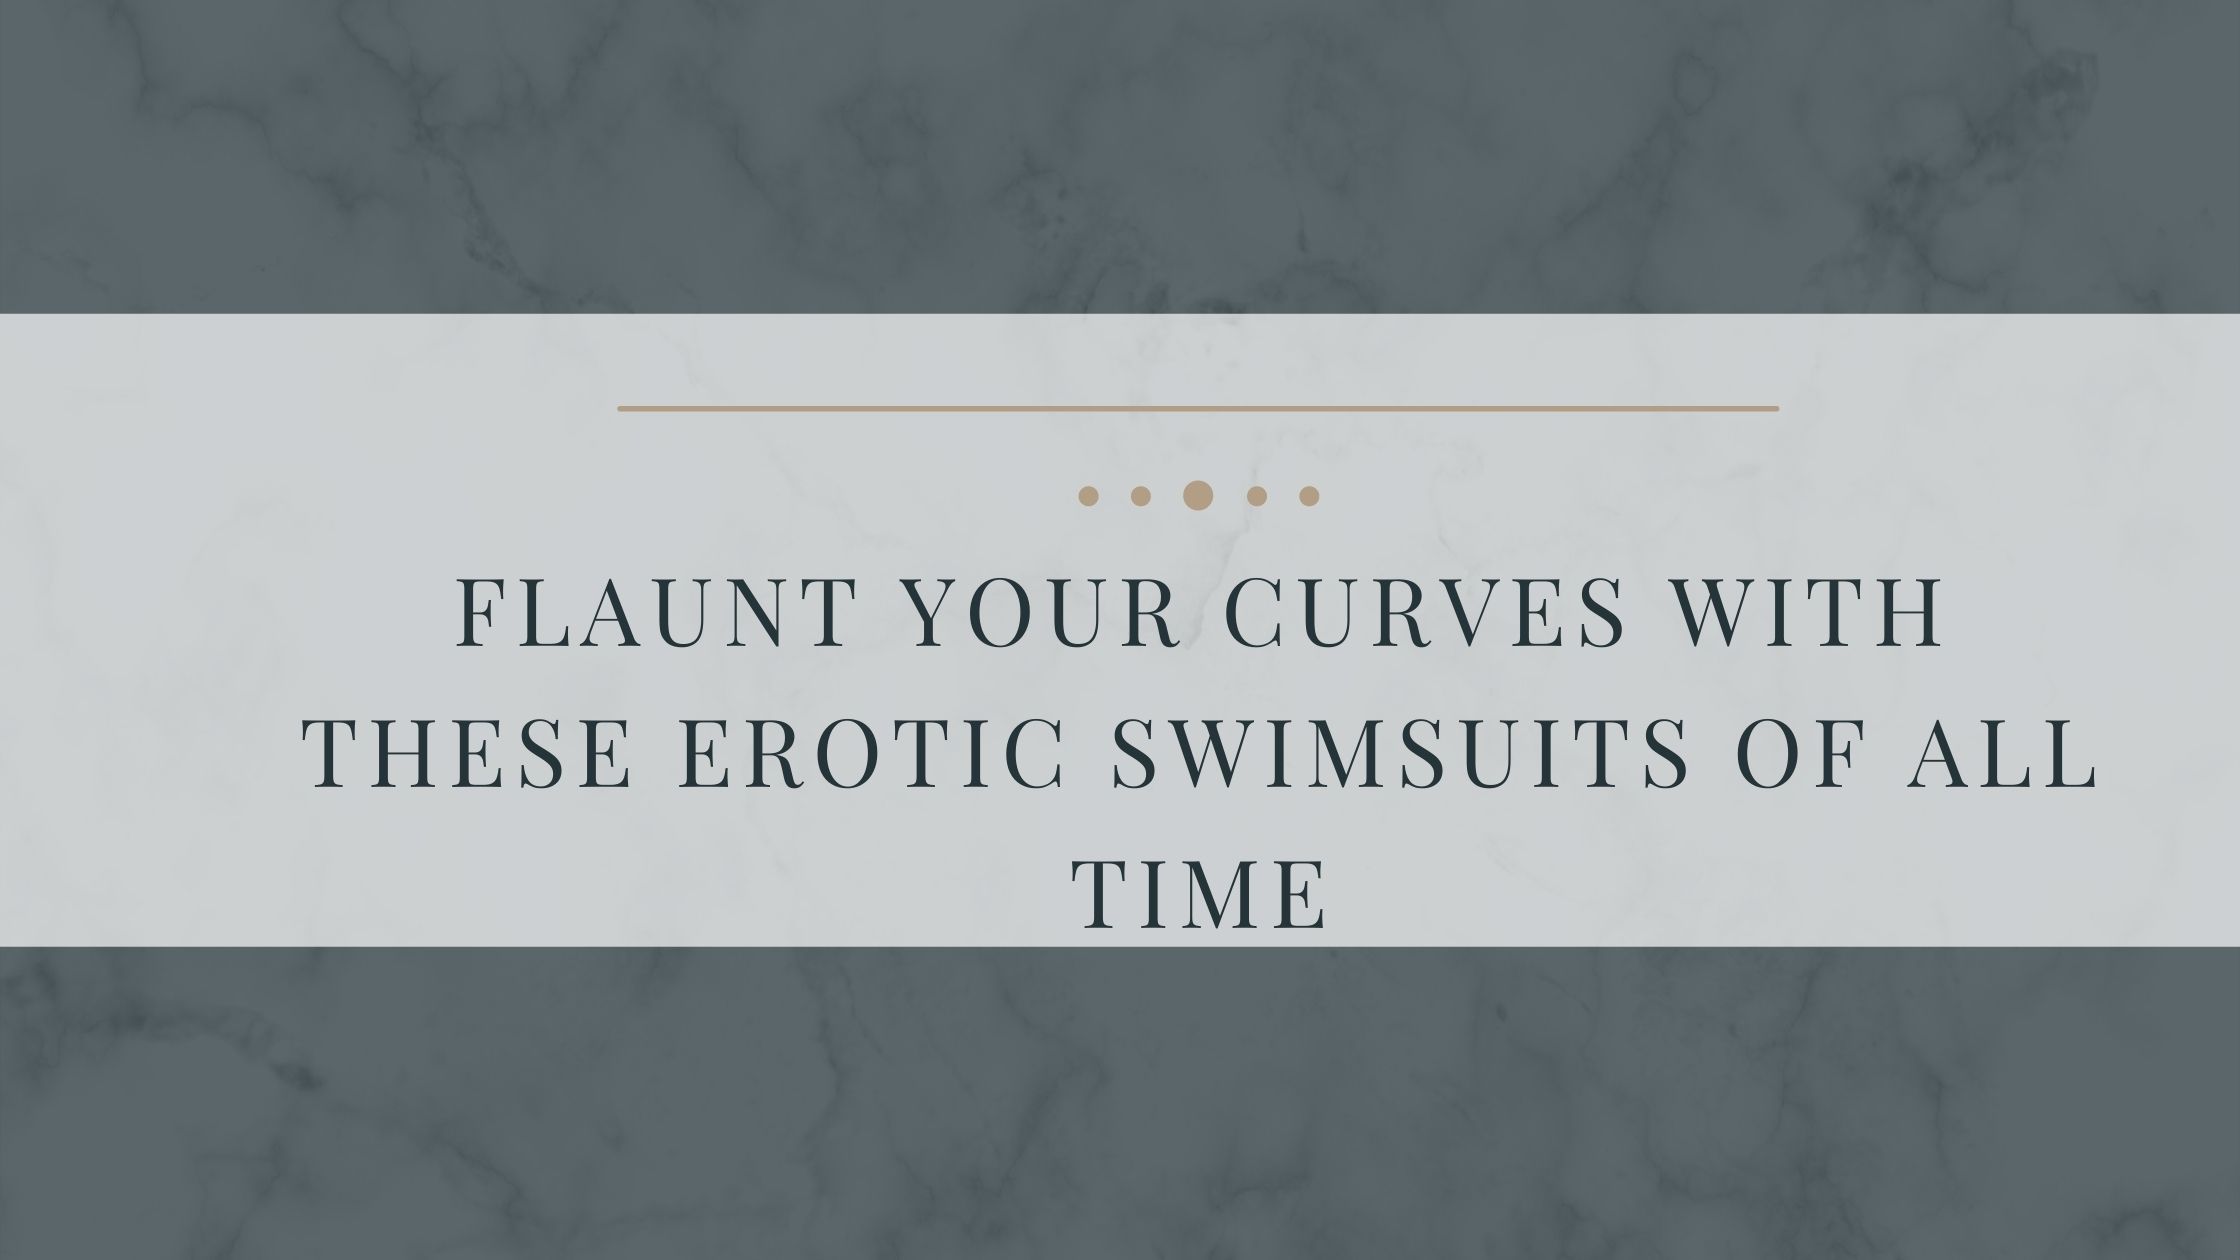 Flaunt Your Curves With These Erotic Swimsuits Of All Time